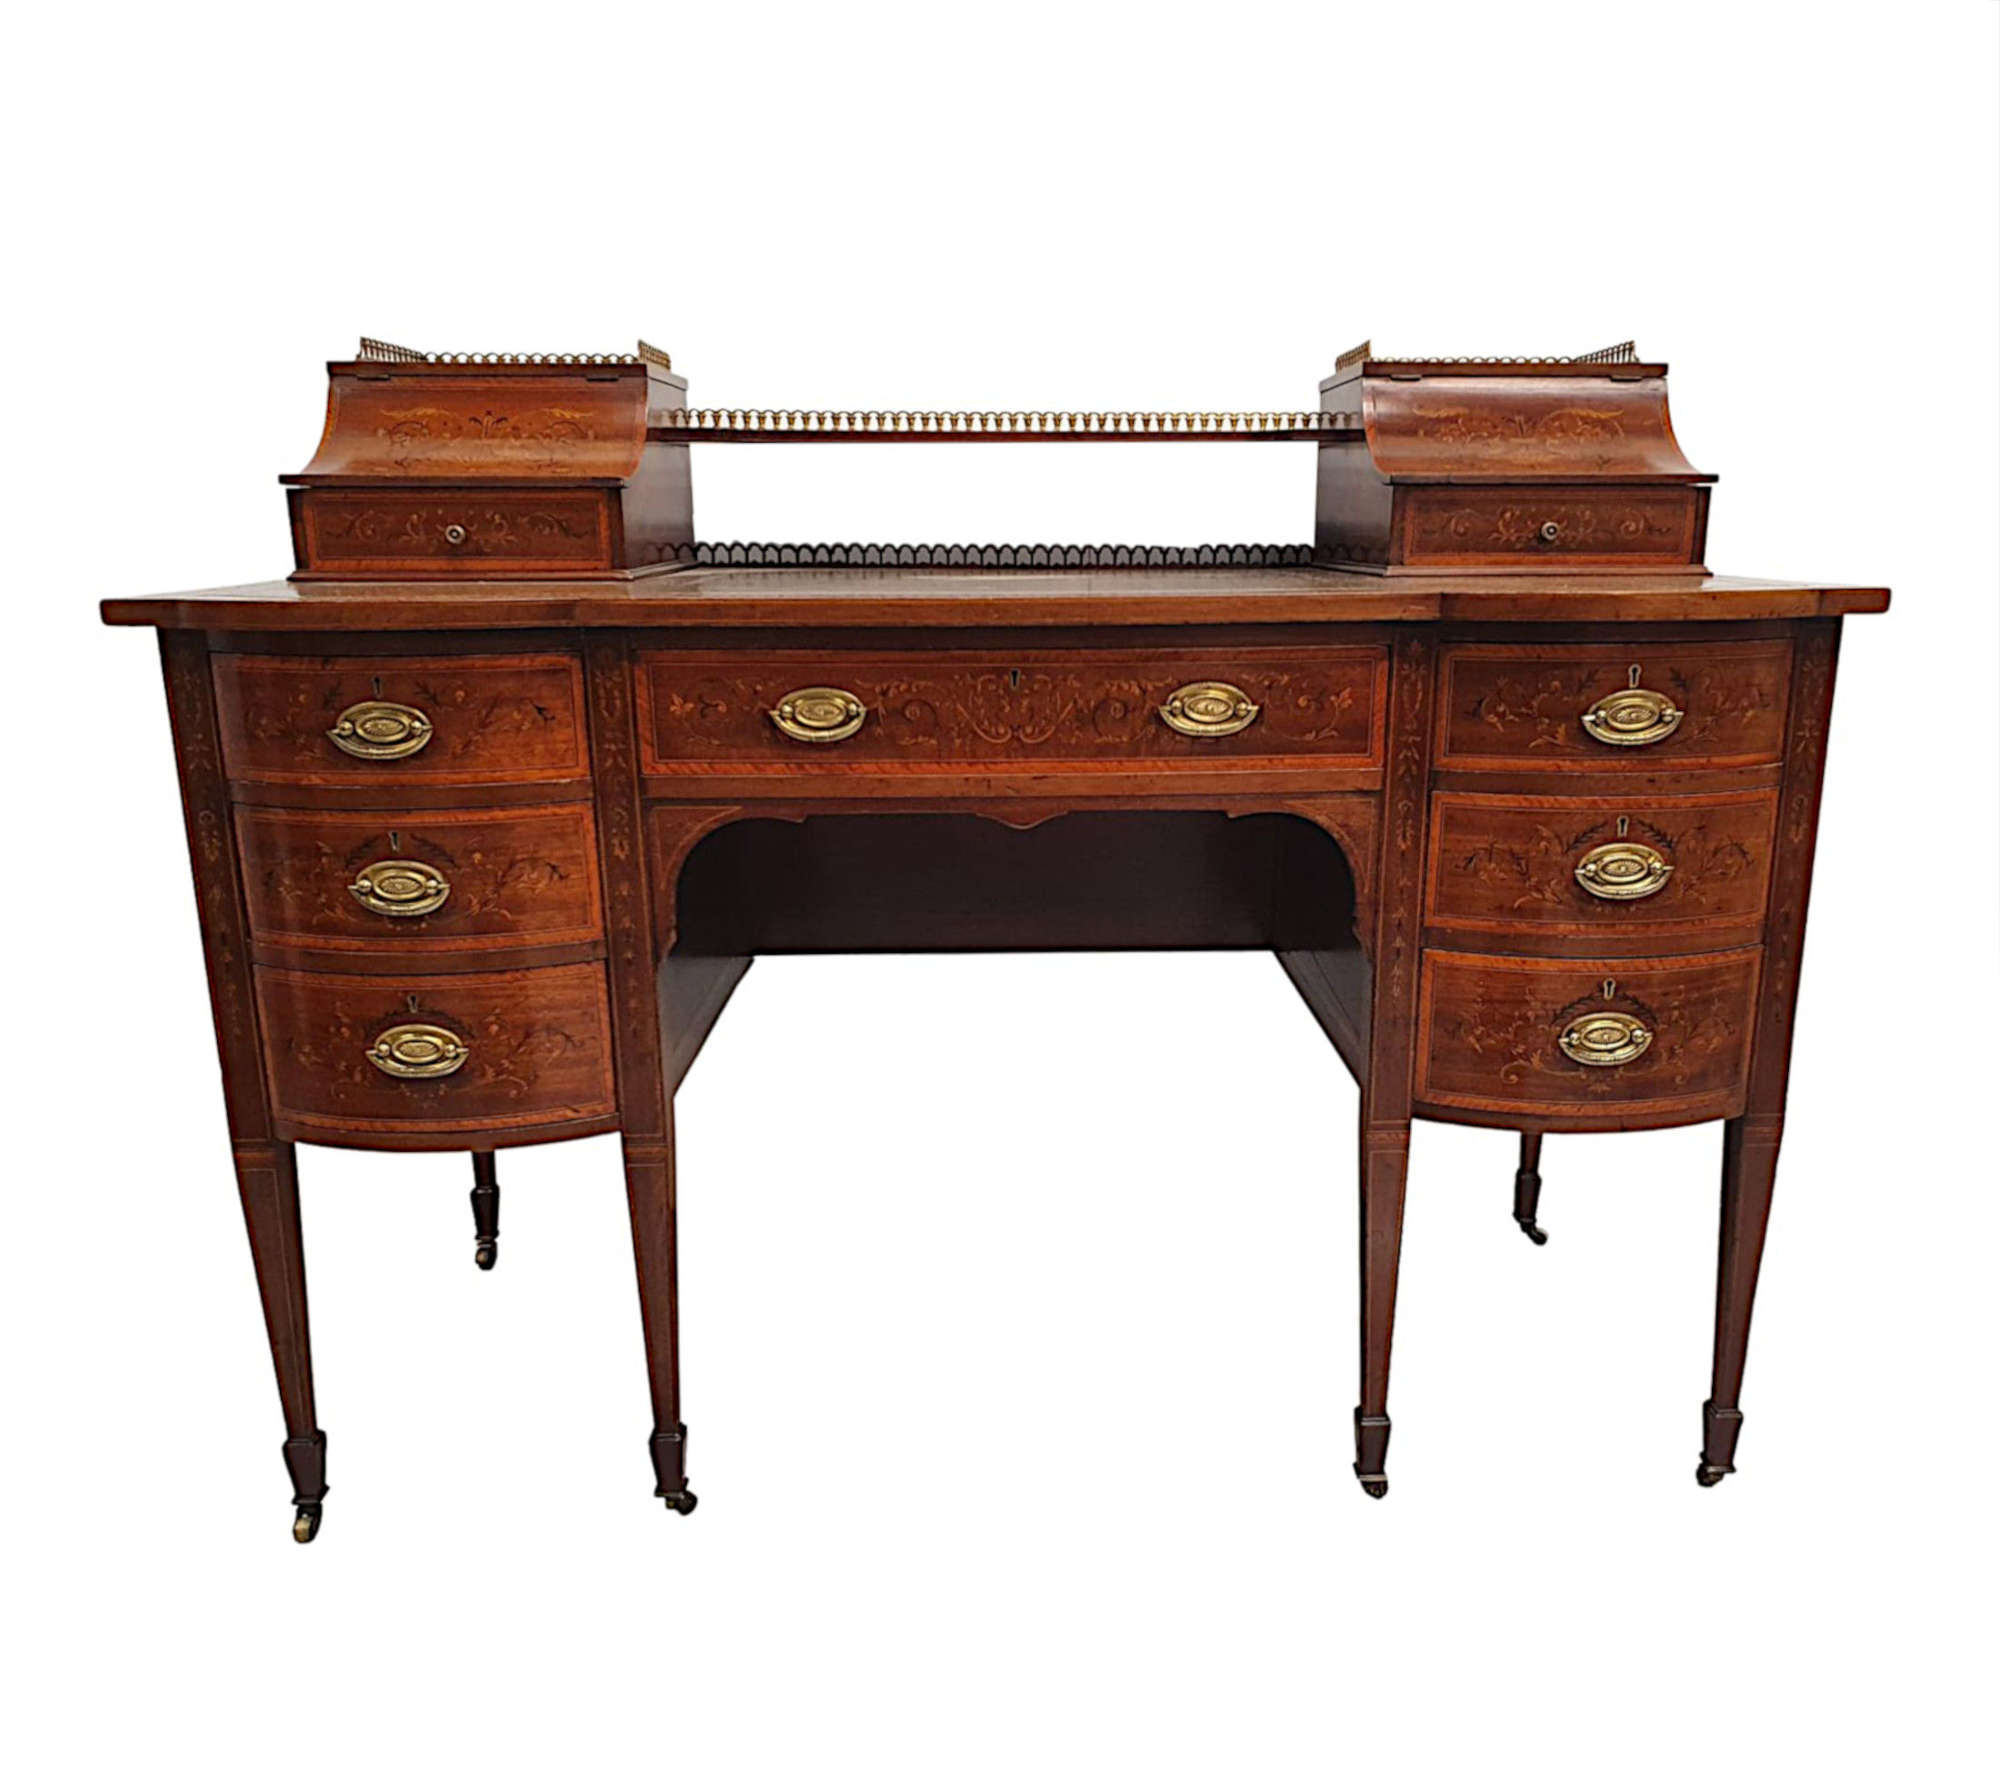 A Stunning Edwardian Desk In The Carlton House Style By Maple Of London